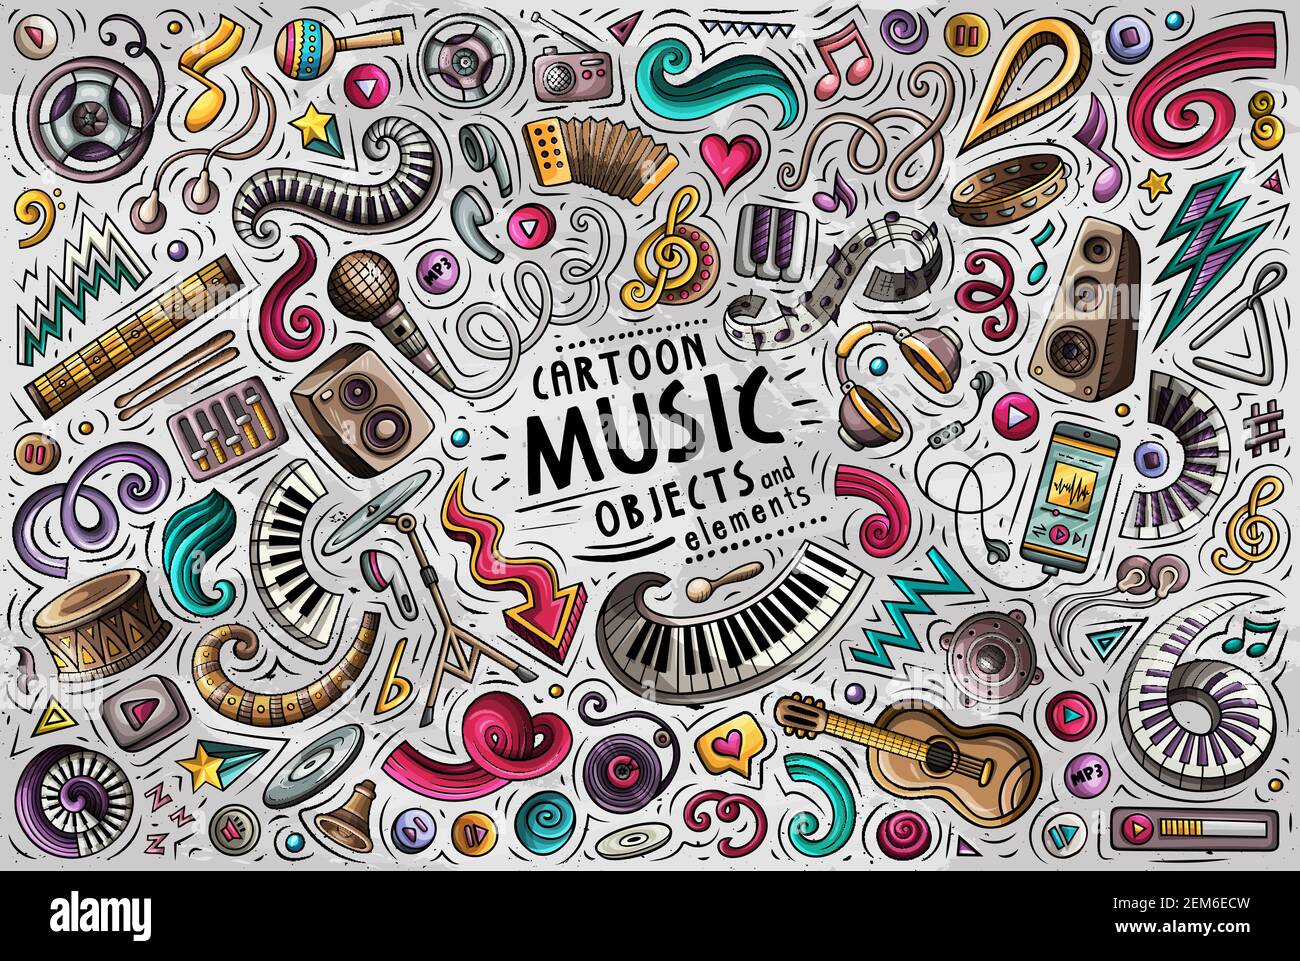 Colorful vector hand drawn doodle cartoon set of Music theme items, objects and symbols Stock Vector